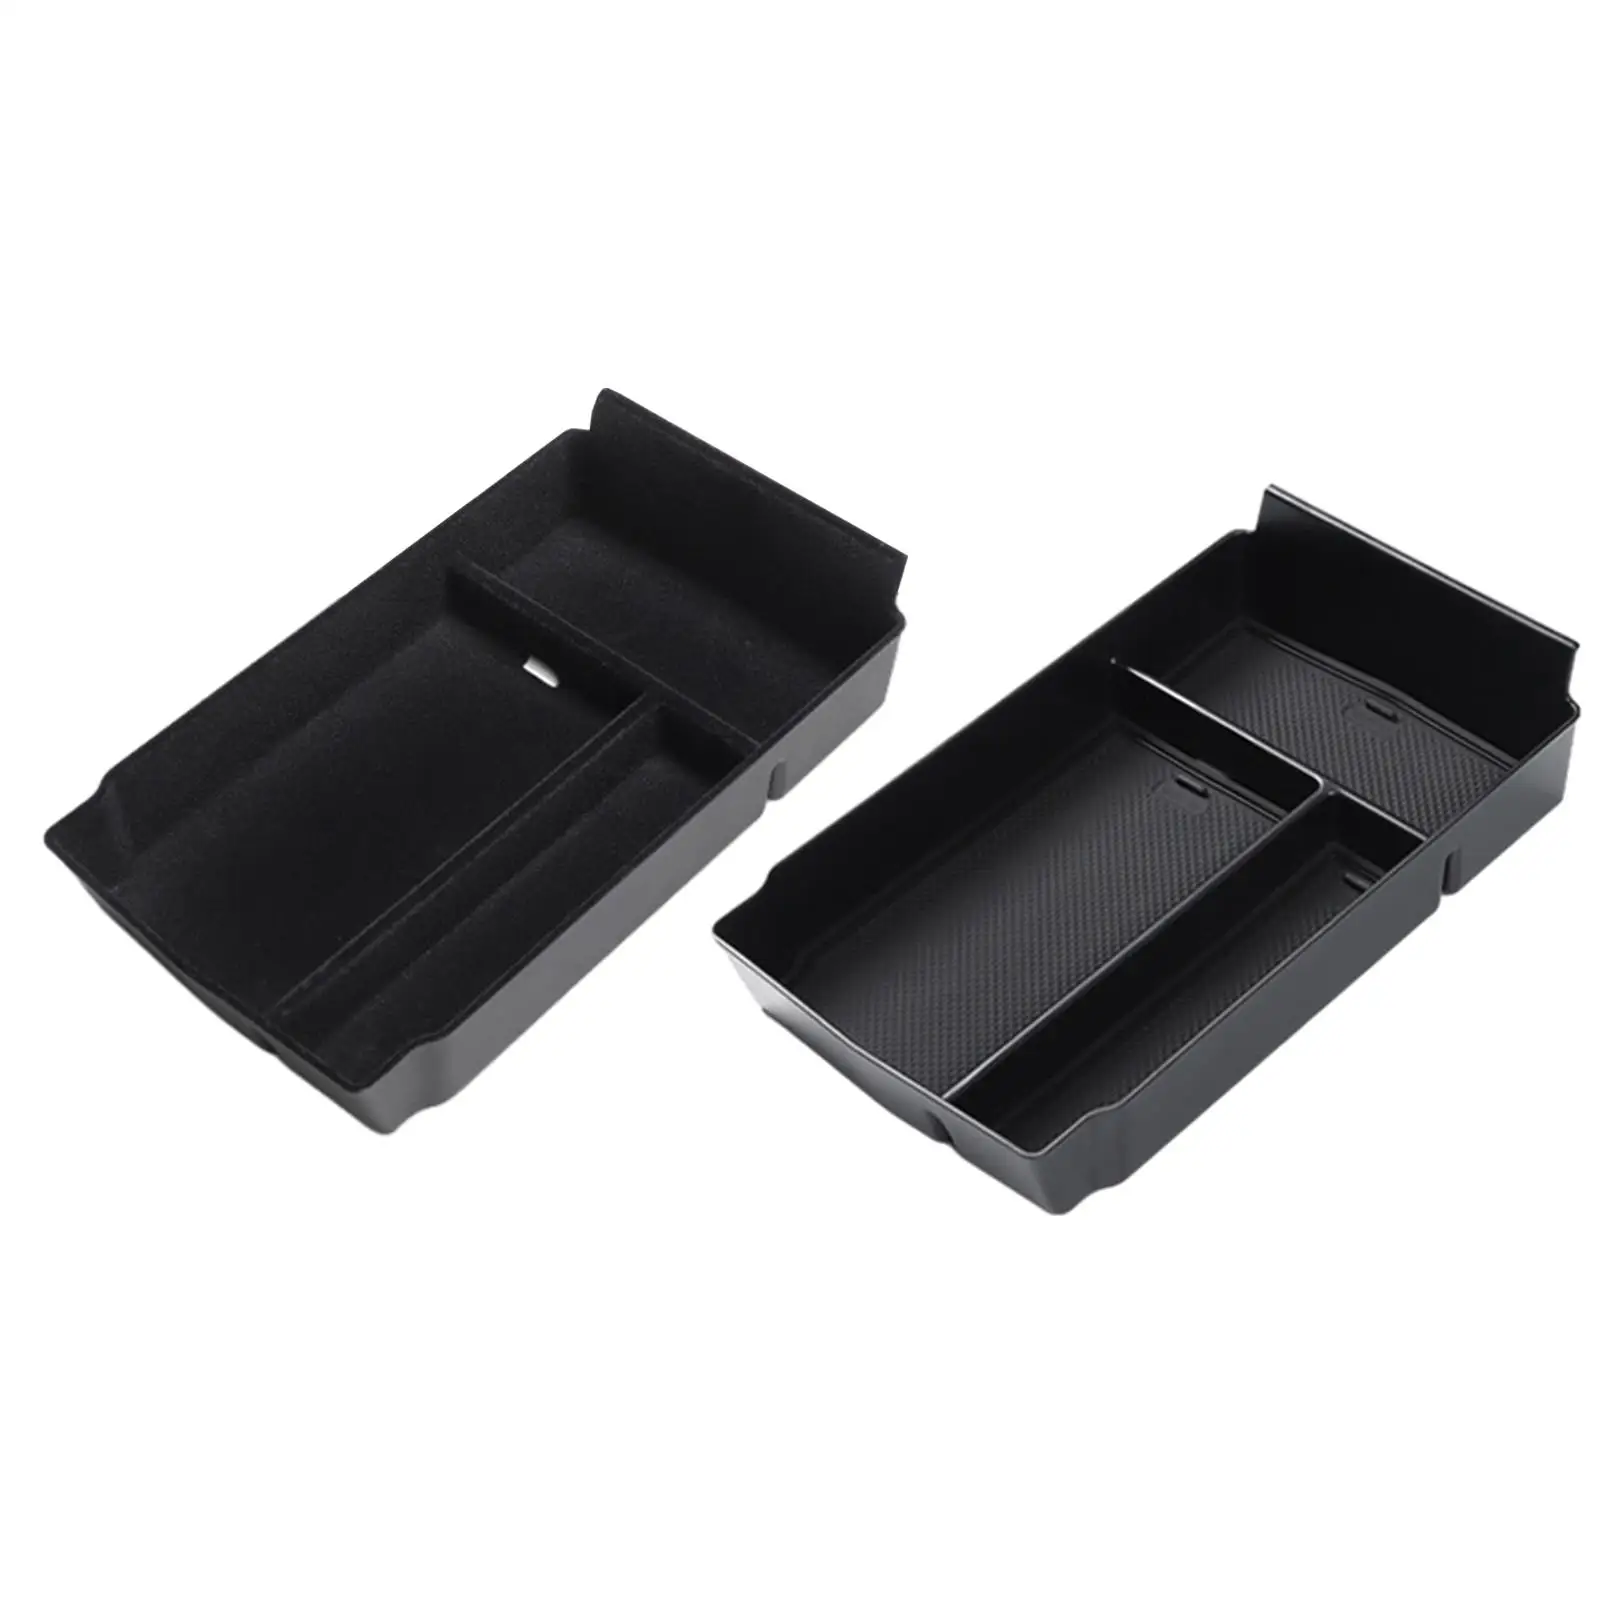 Center Console Organizer Tray Small Items Storage Easy to Install Spare Parts Replaces 3 Compartments for Honda CRV